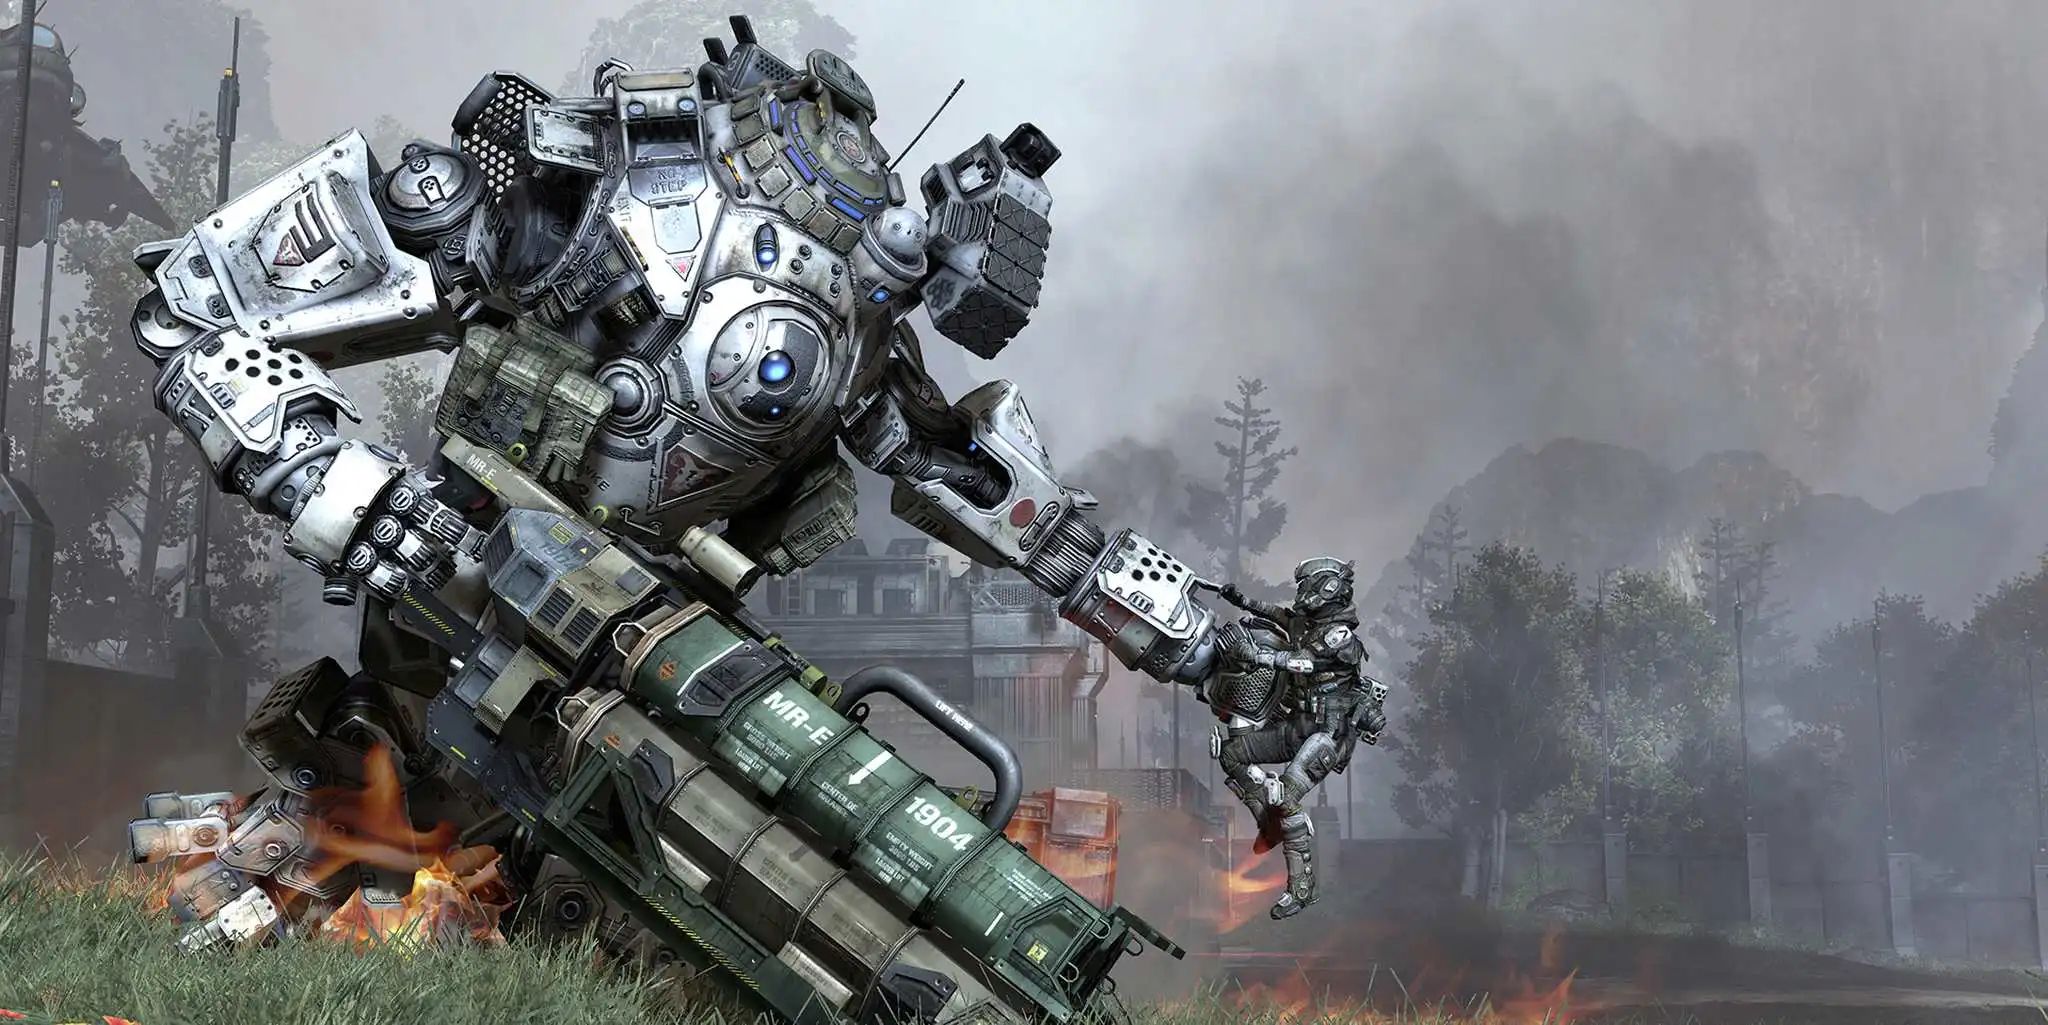 Titanfall 2 Cross-Play Possible